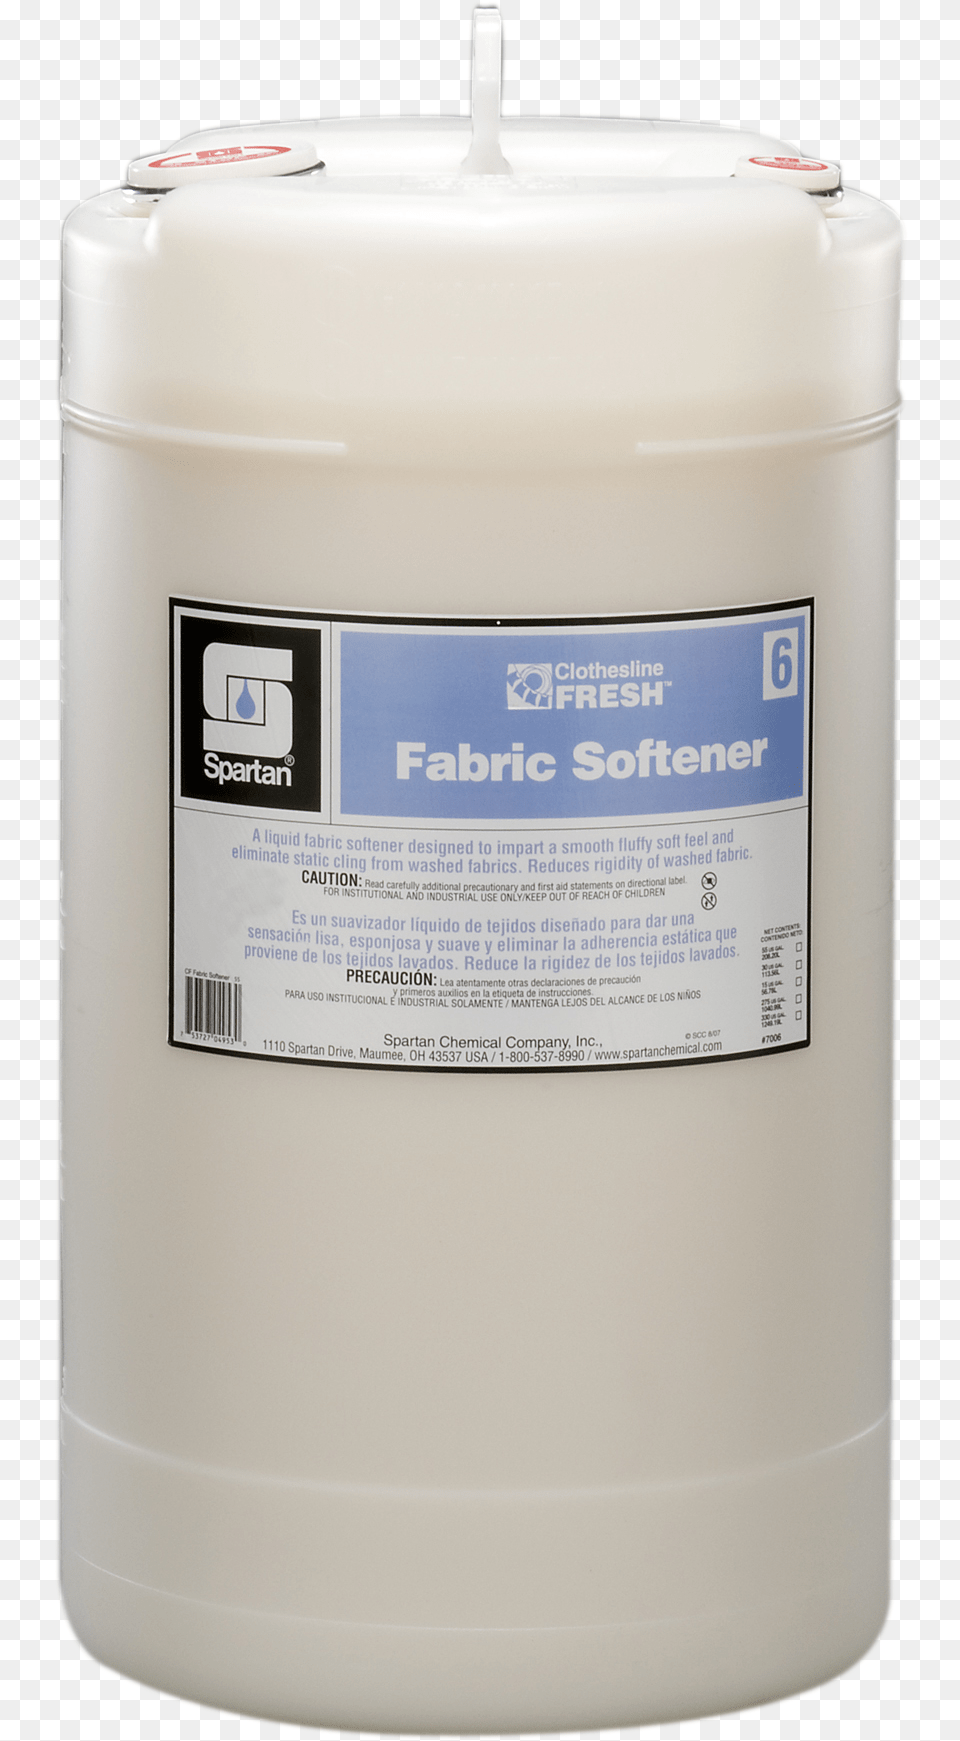 Clf Fabric Softener Spartan Clothesline Fresh Fabric Softener 6 15 Gal, Bottle, Shaker, Candle Free Png Download